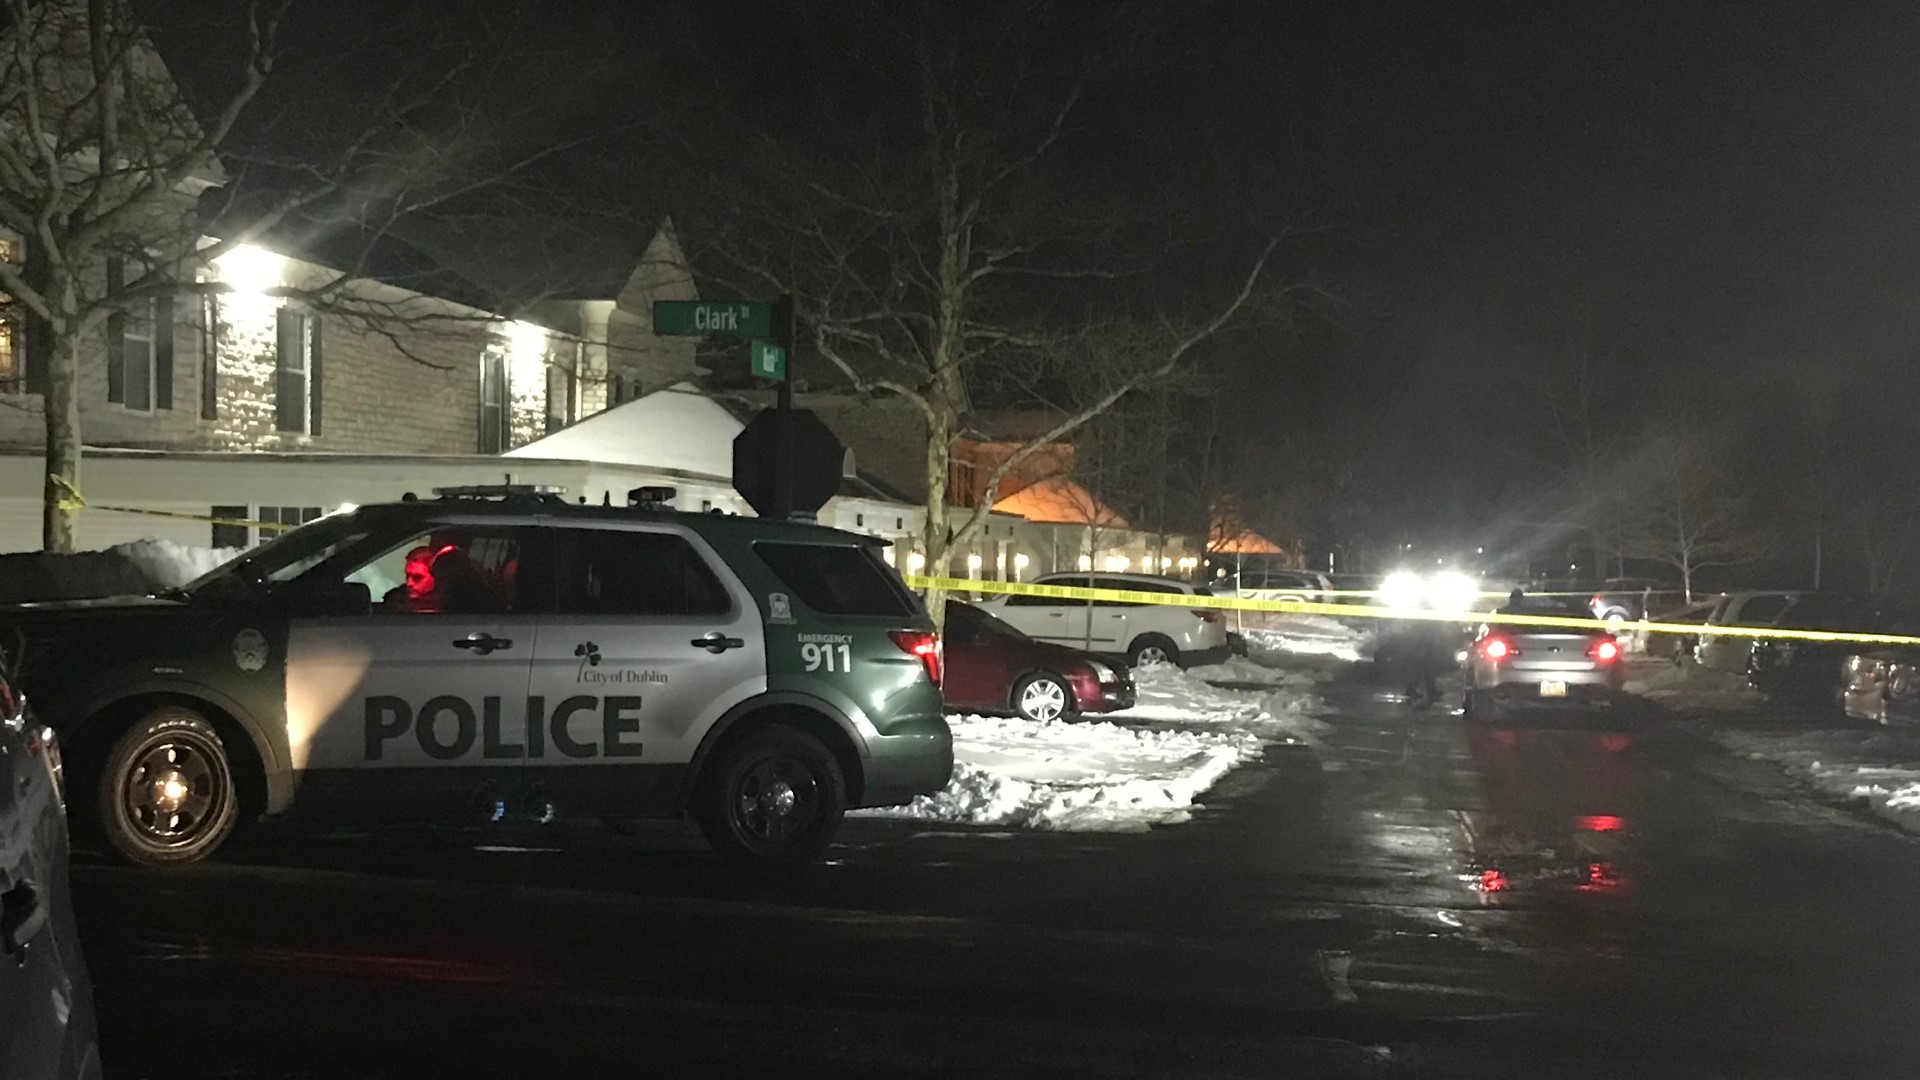 The shooting happened near 6700 Sycamore Ridge Boulevard around 8:35 p.m. Police said the victim's injuries do not appear to be life-threatening.